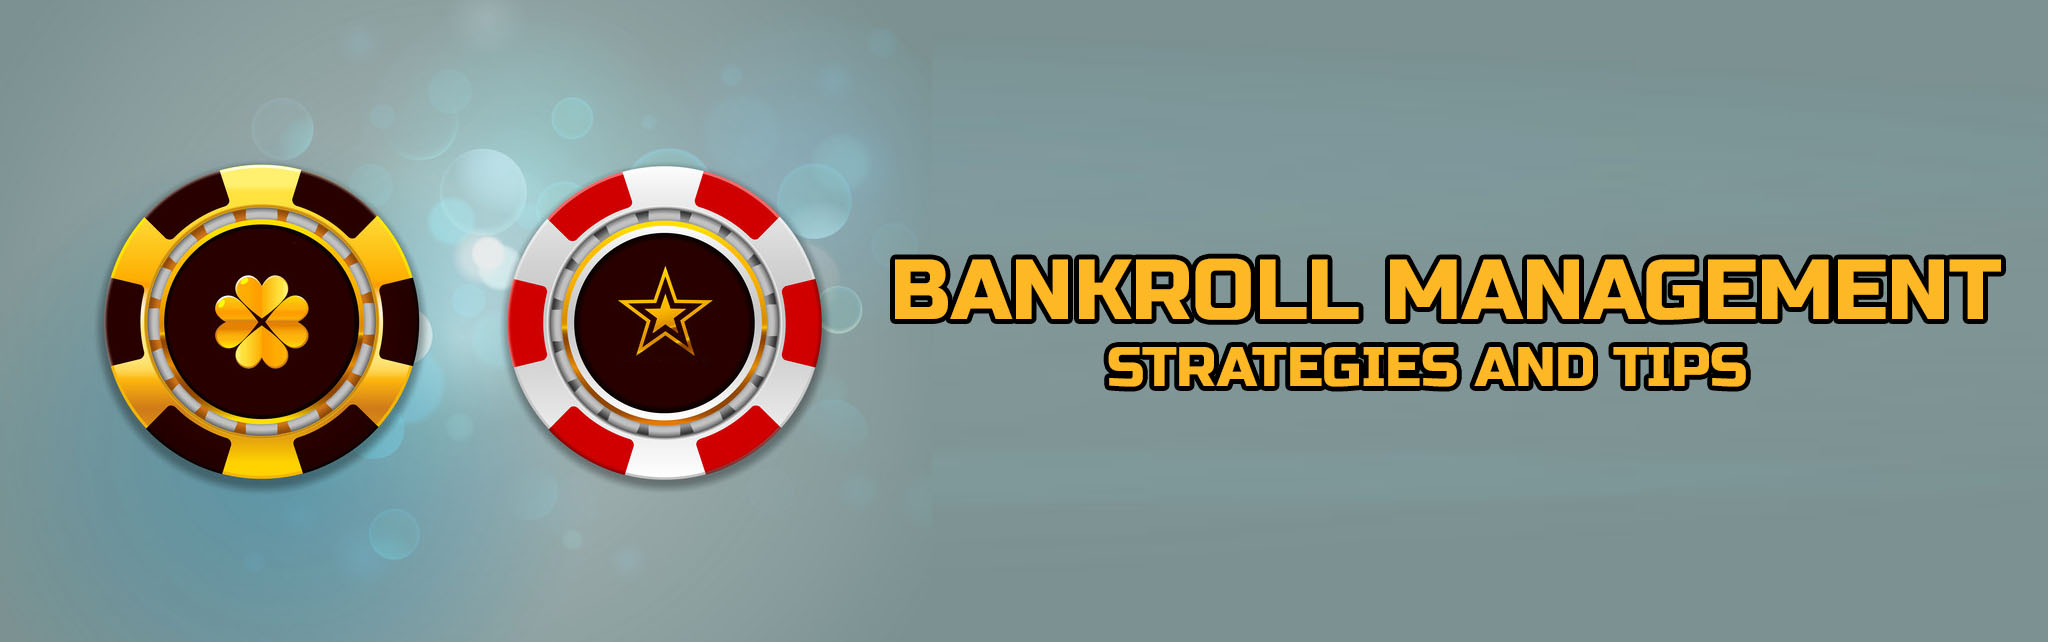 Bankroll Management Strategies and Tips